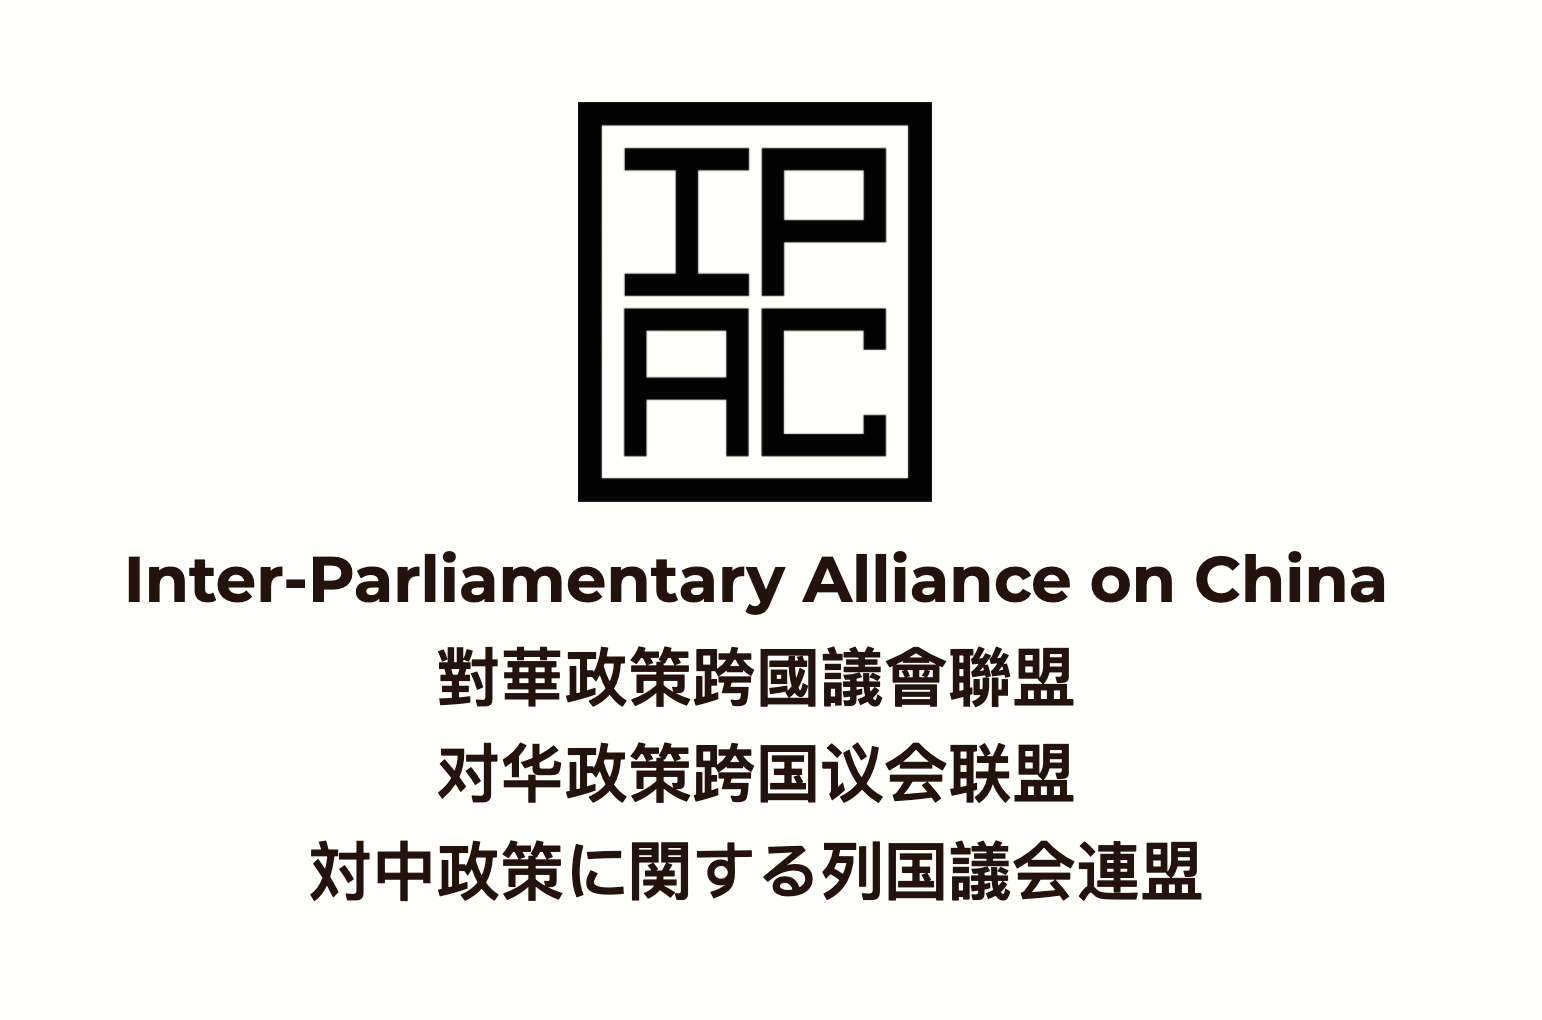 Inter-Parliamentary Alliance on China launched